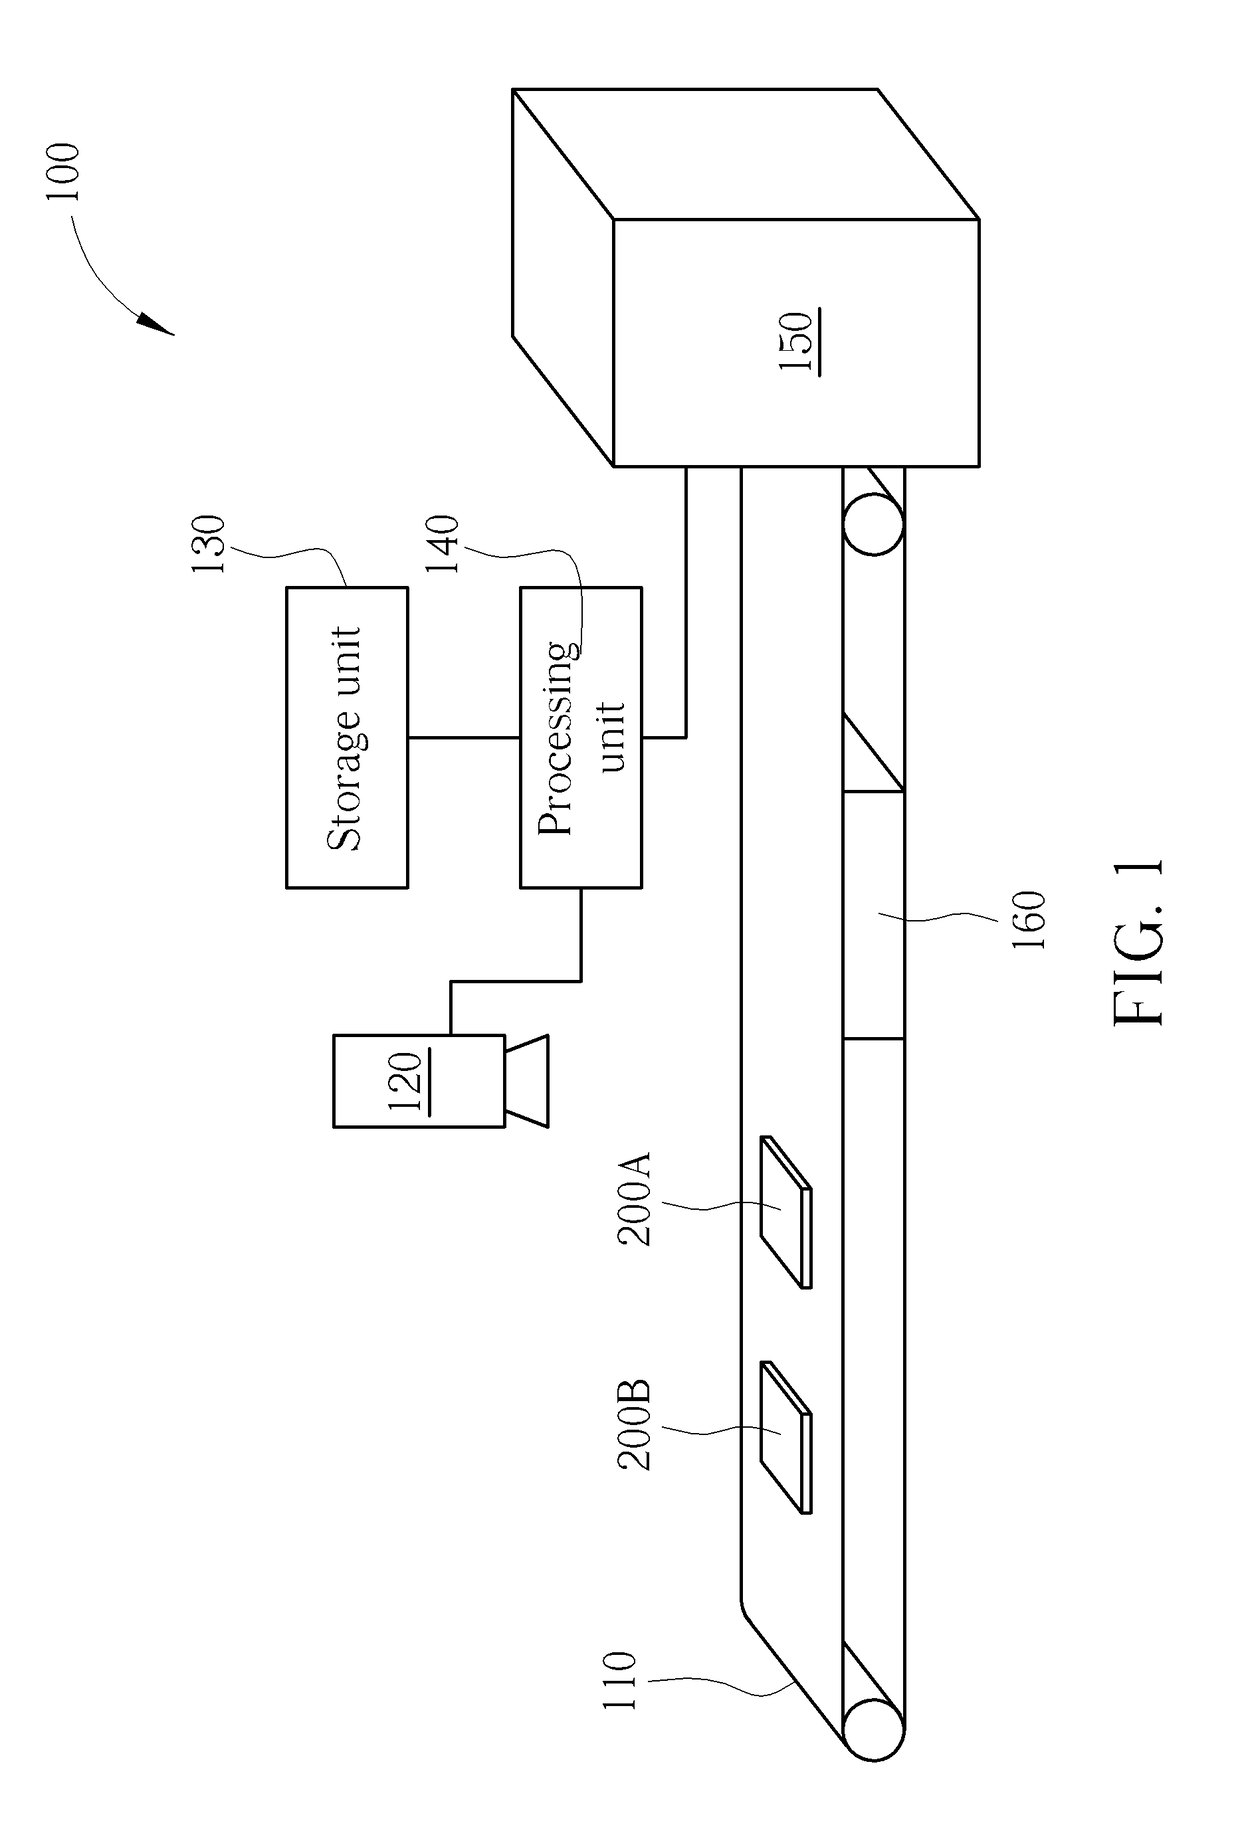 Electronic product sorting system and sorting method